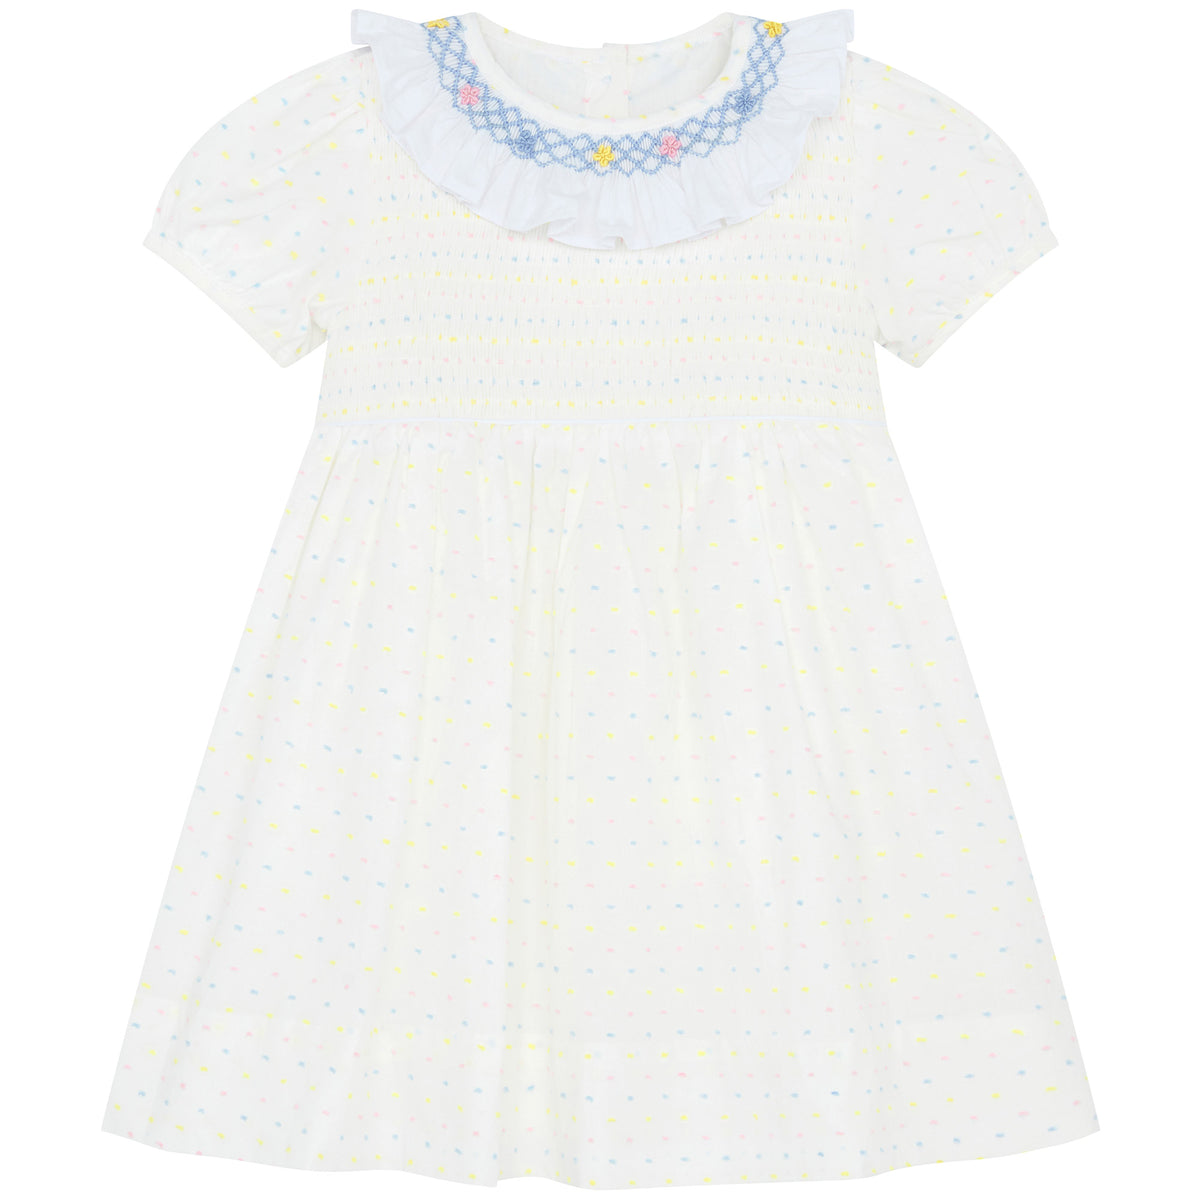 Little Princess Anne Hand Smocked Embroidered Dot Cotton Girls Dress White Pink | Holly Hastie London